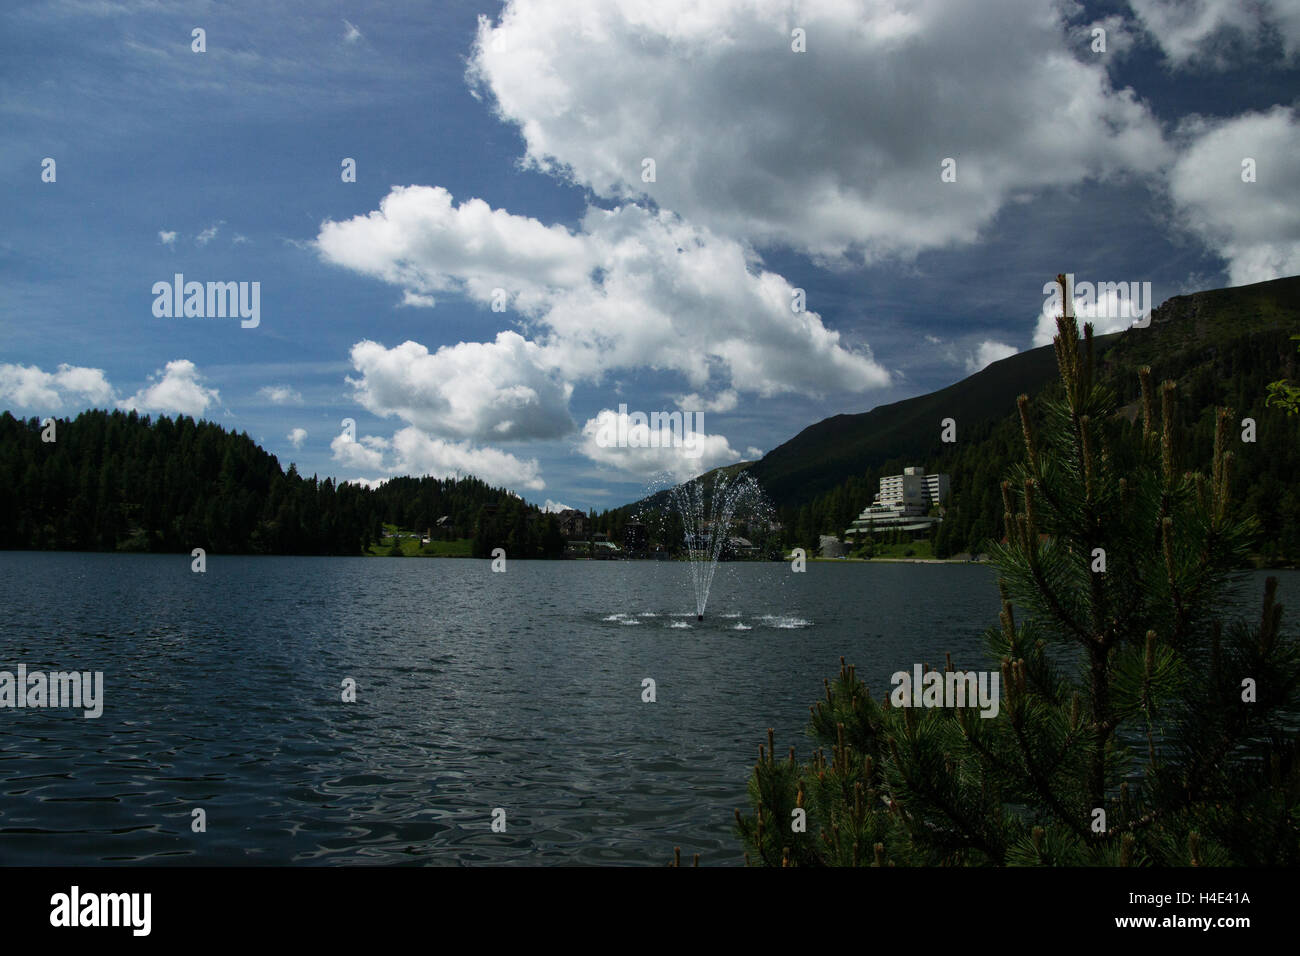 The Lake Turrach is an Alpine lake at Turracher Hoehe Pass, on the state border of Carinthia and Styria in Austria. Stock Photo